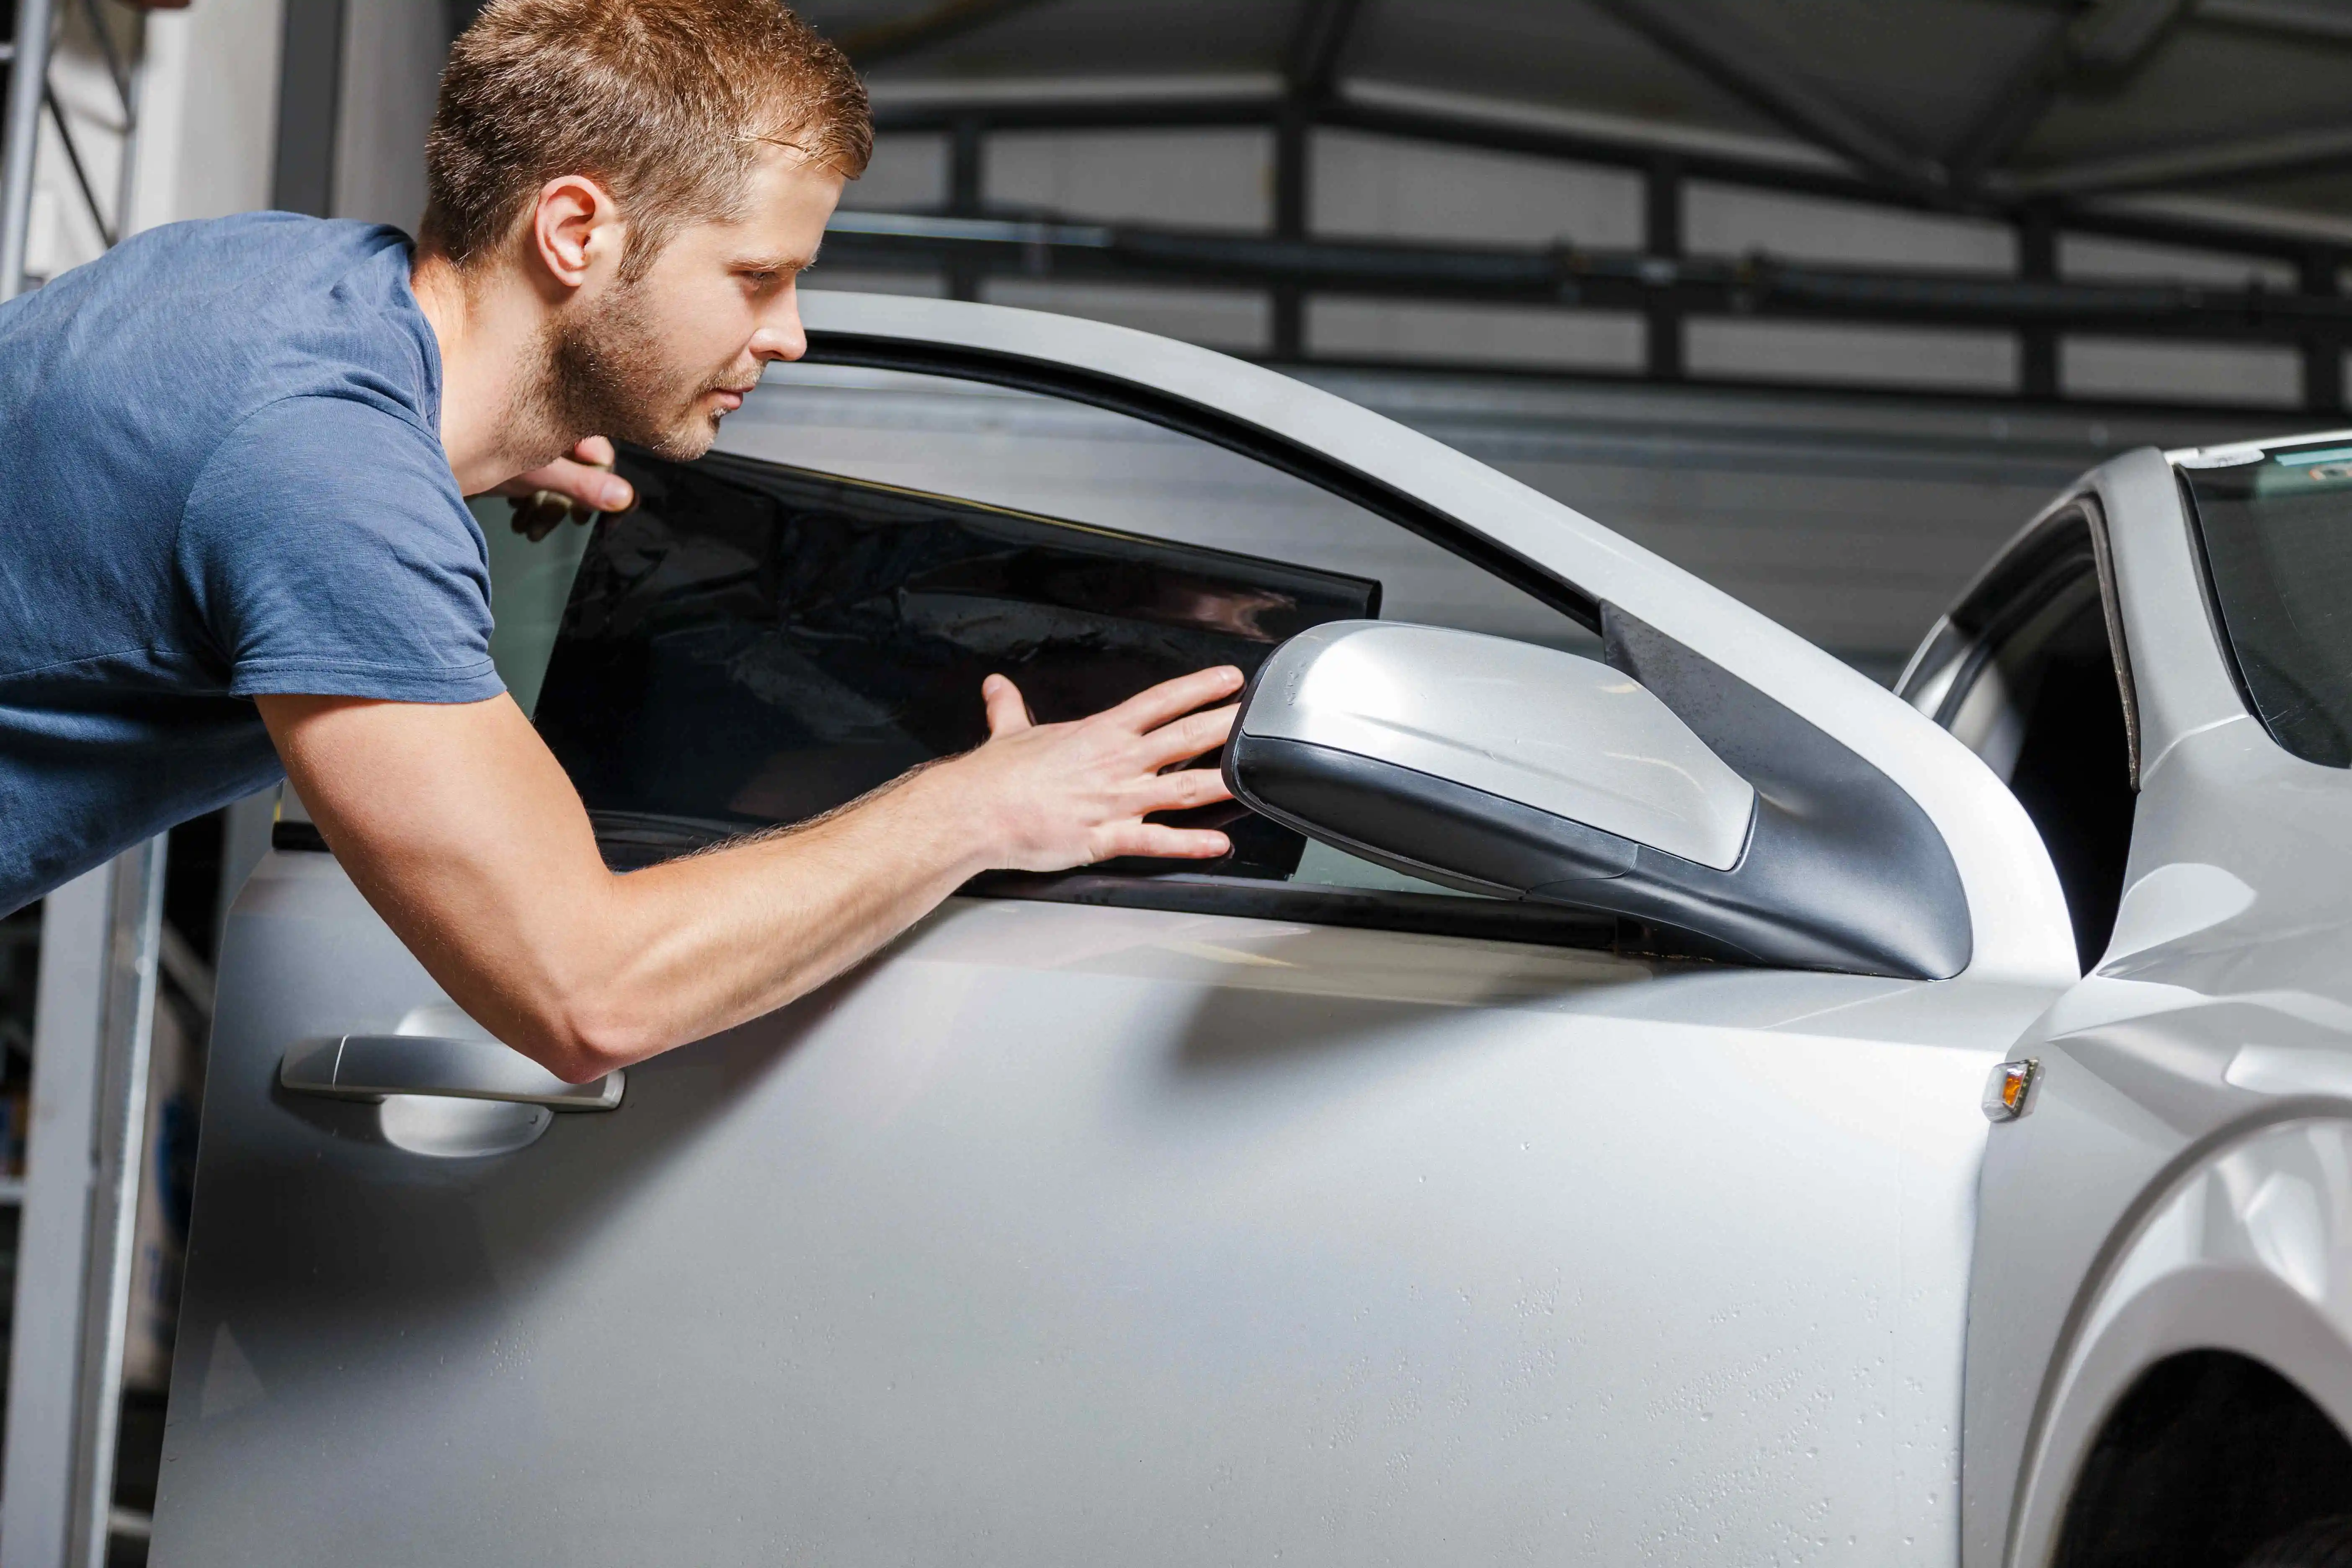 The 4 Questions You Should Ask Before Tinting Your Car